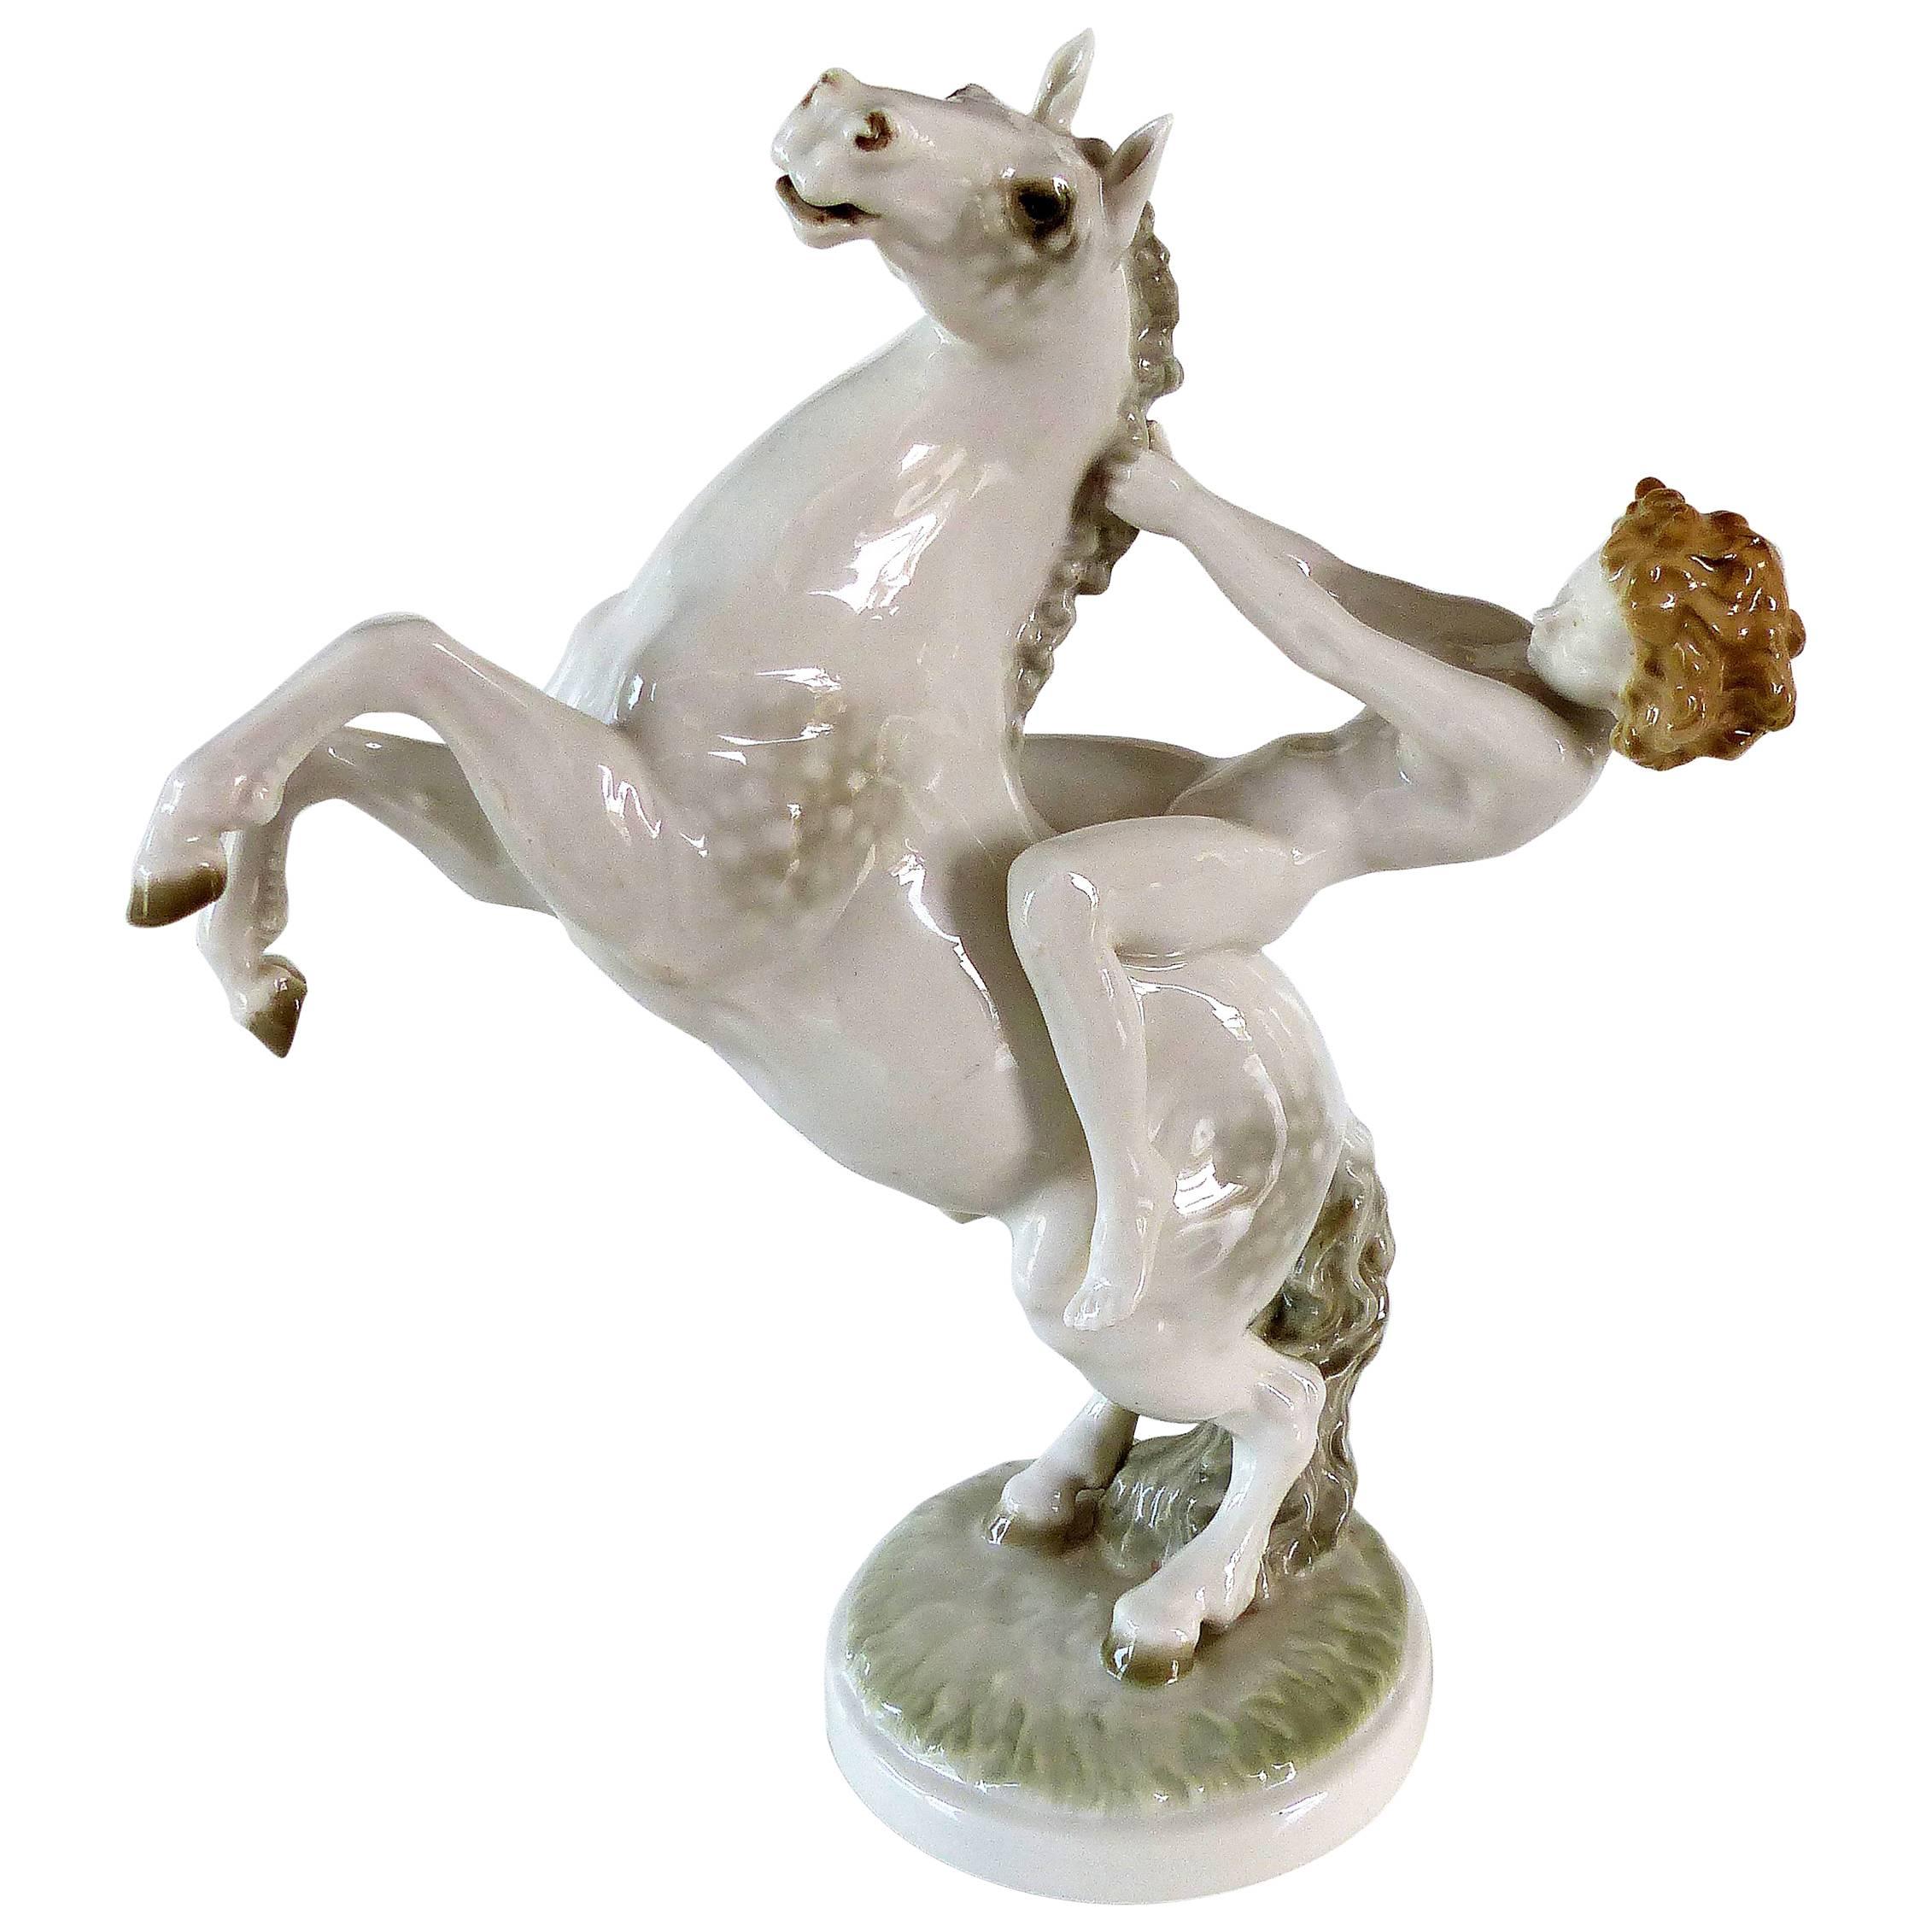 Hutschenreuther Germany Porcelain Rearing Horse and Rider